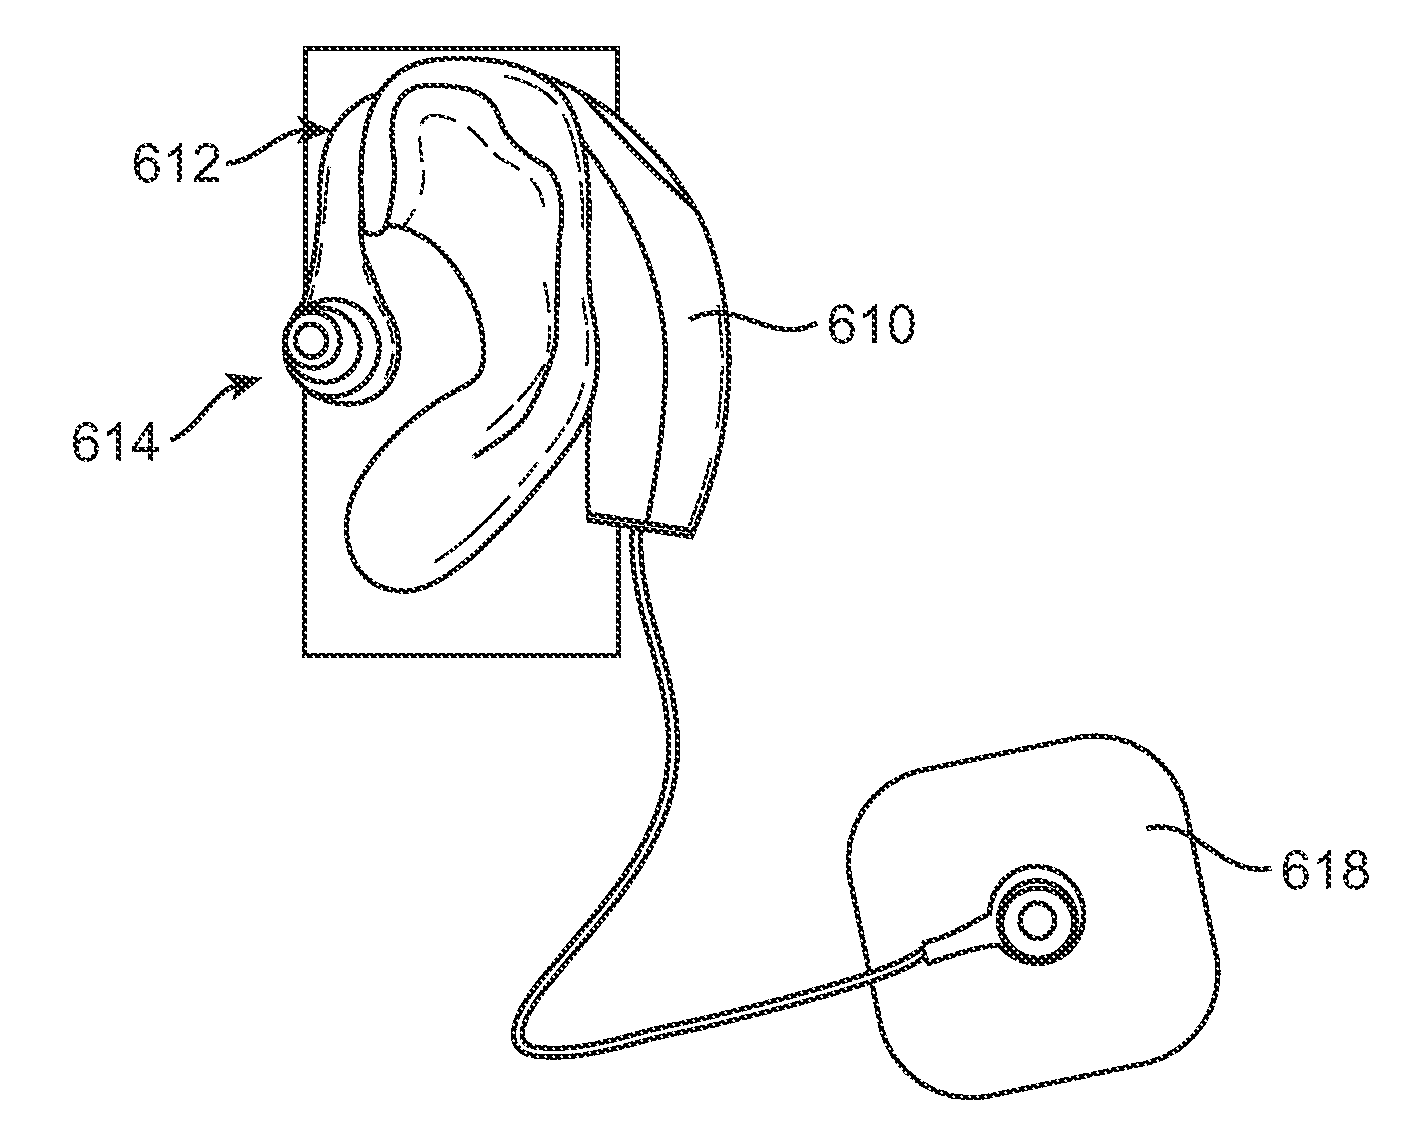 Systems and methods for anesthetizing ear tissue